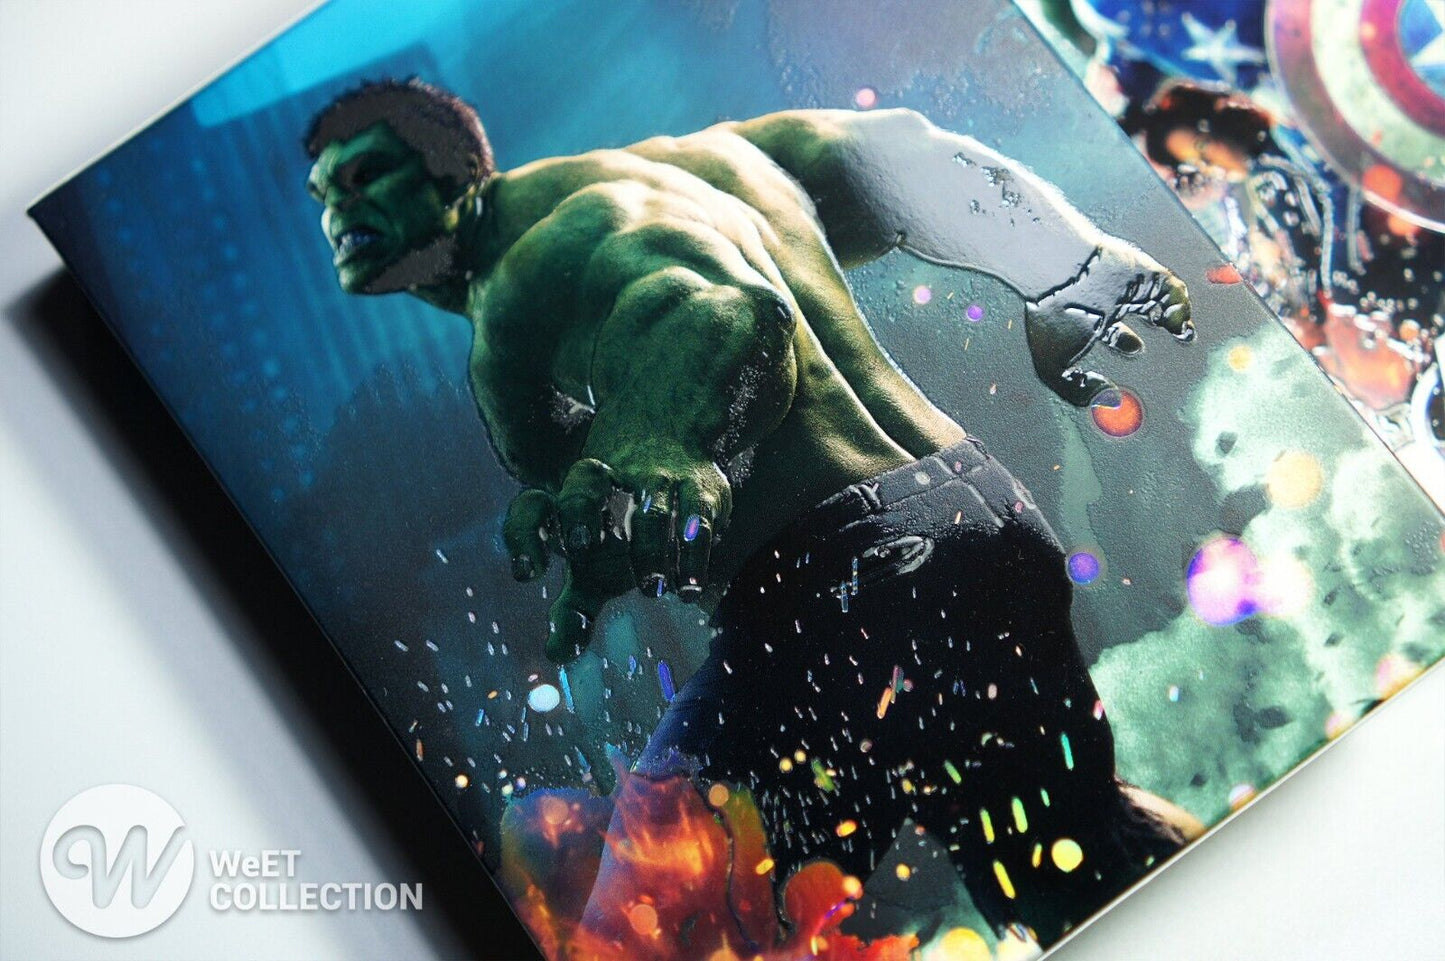 Avengers 4K+2D+3D Blu-ray SteelBook WeET Collection Exclusive #14  Full Slip A1